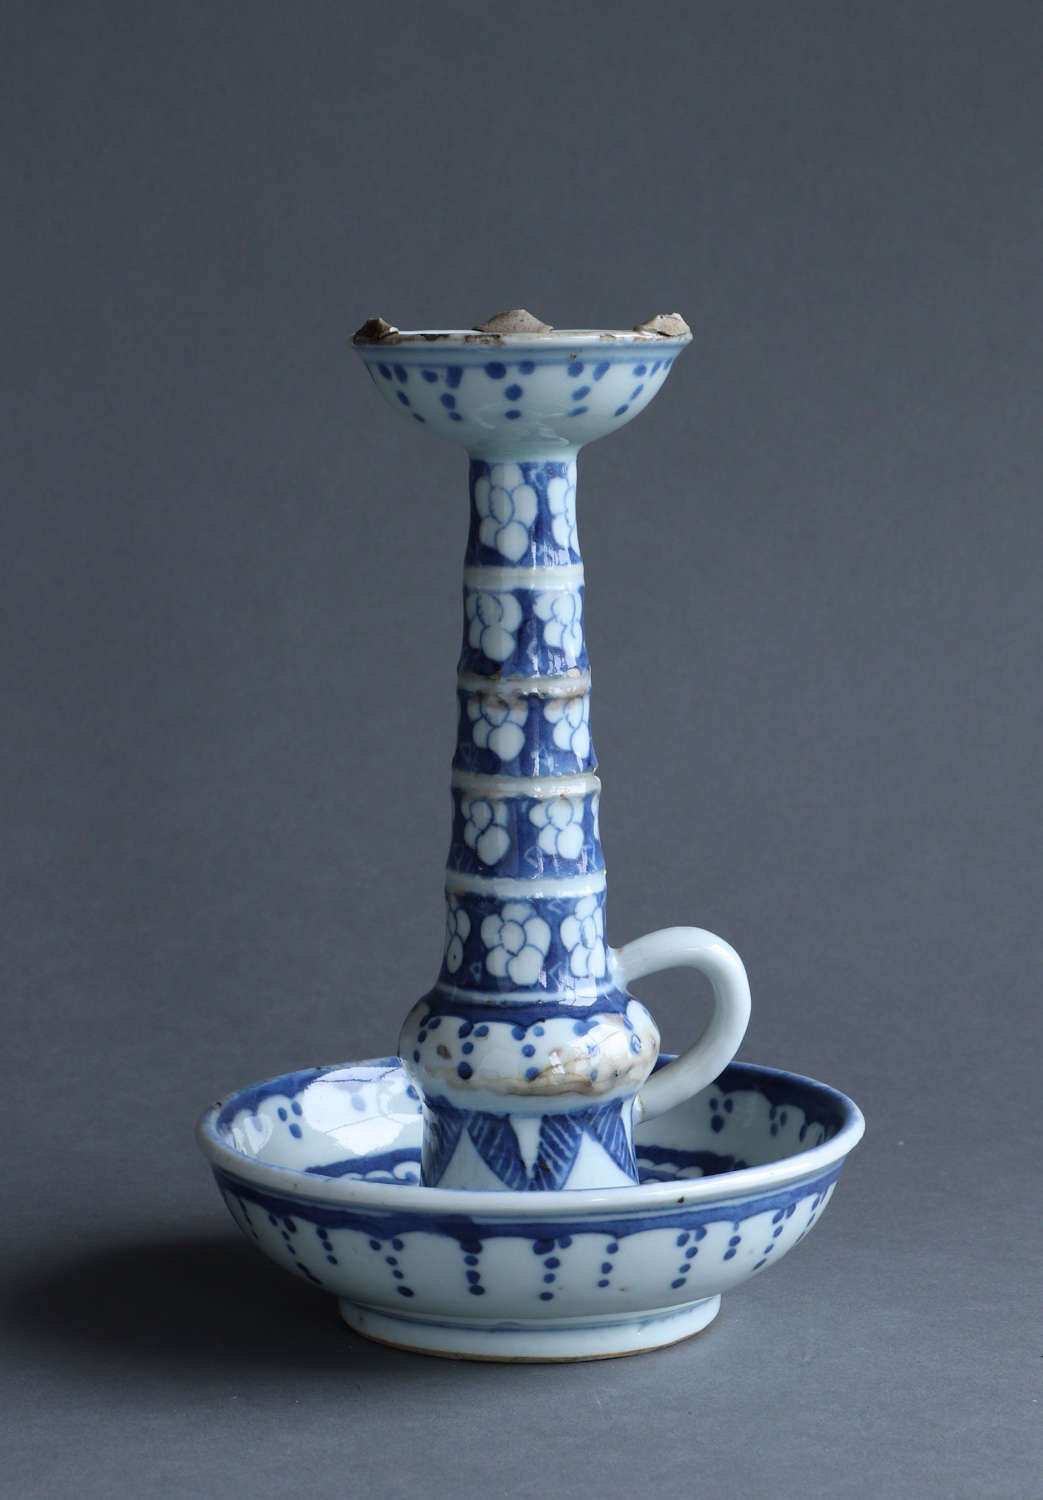 A Nineteenth Century Chinese export candlestick or taperstick.